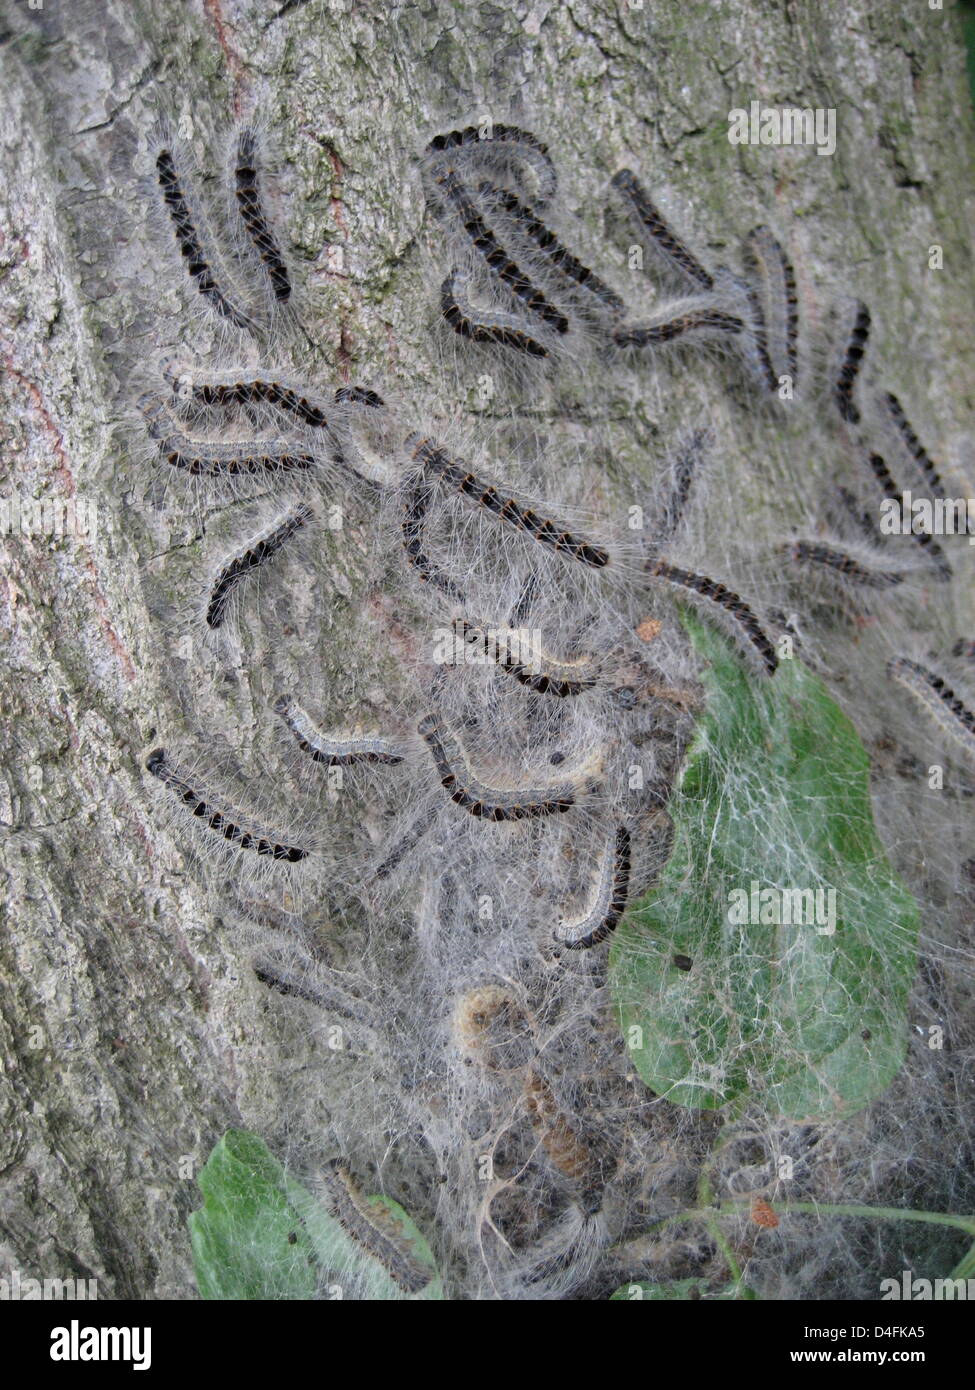 Oak Processionary caterpillars have afflicted an aok tree in   Rosswag, Germany, 7 June 2008. The caterpillars produce a nettle-like poison which is harmful to humans, causing irritations of the skin and the eyes, breathing problems, fever and dizziness. Photo: Arne Dedert Stock Photo